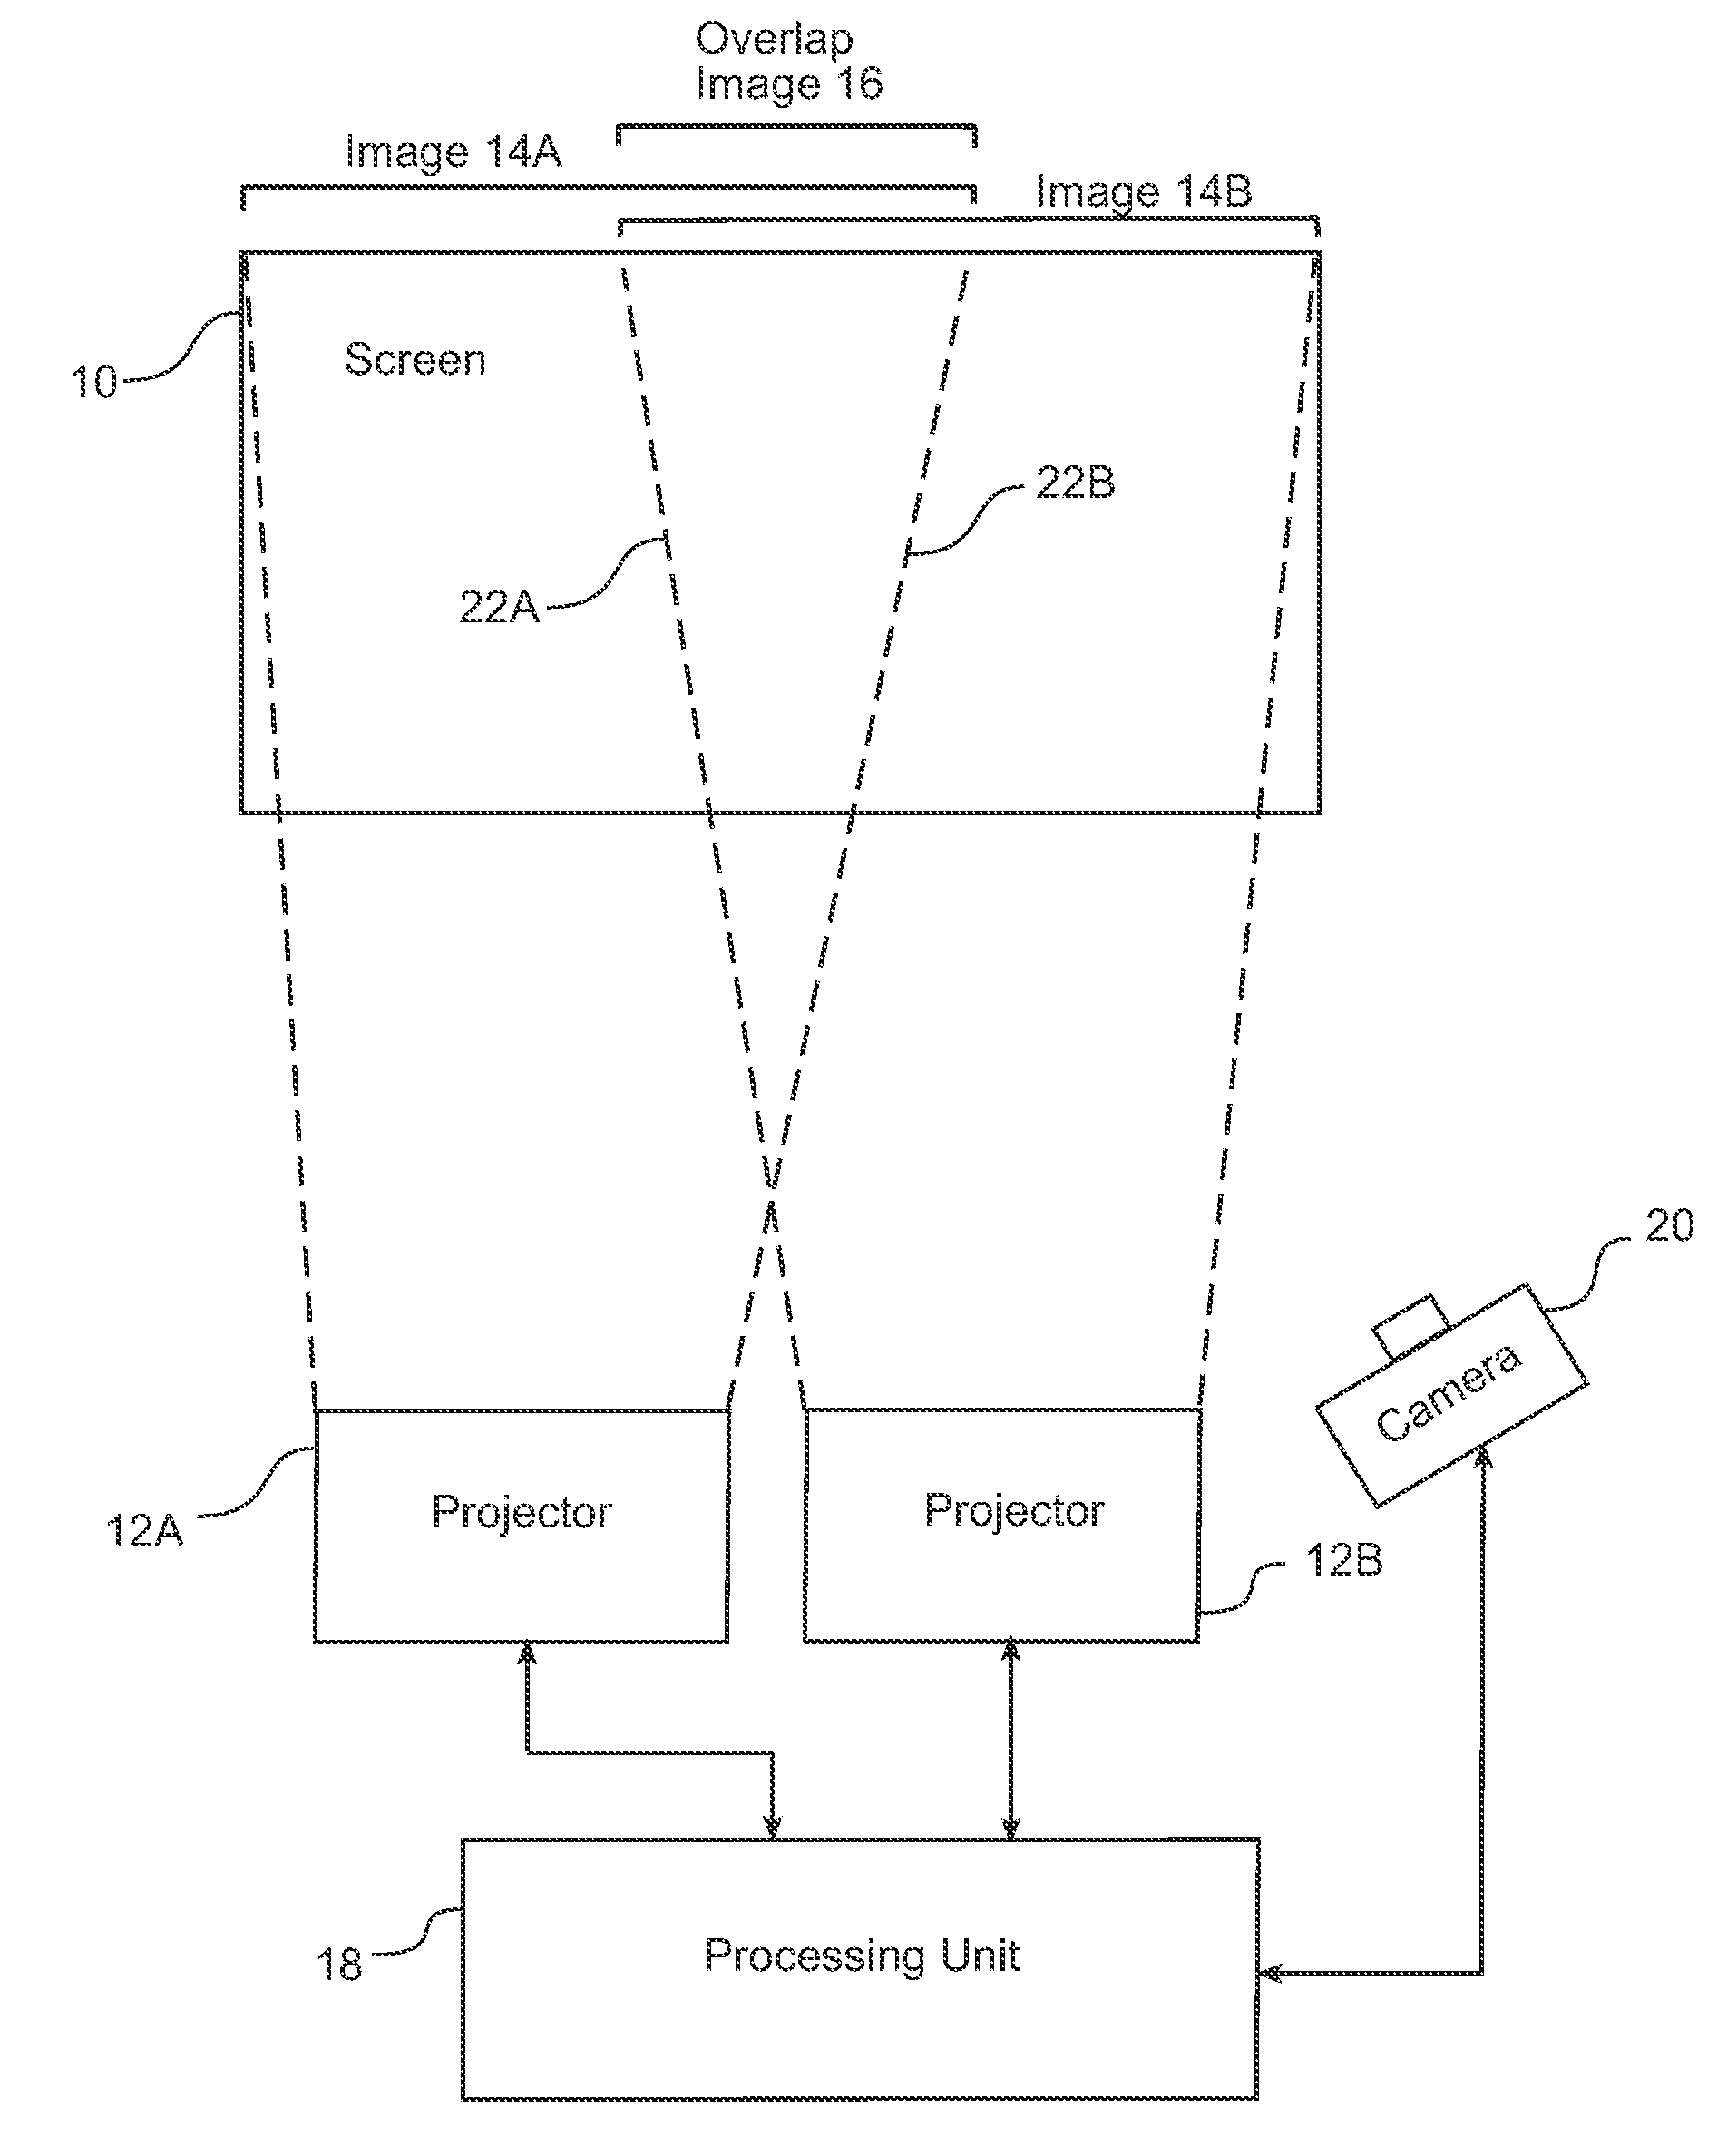 Method and Apparatus for Determining the Best Blending of Overlapped Portions of Projected Images